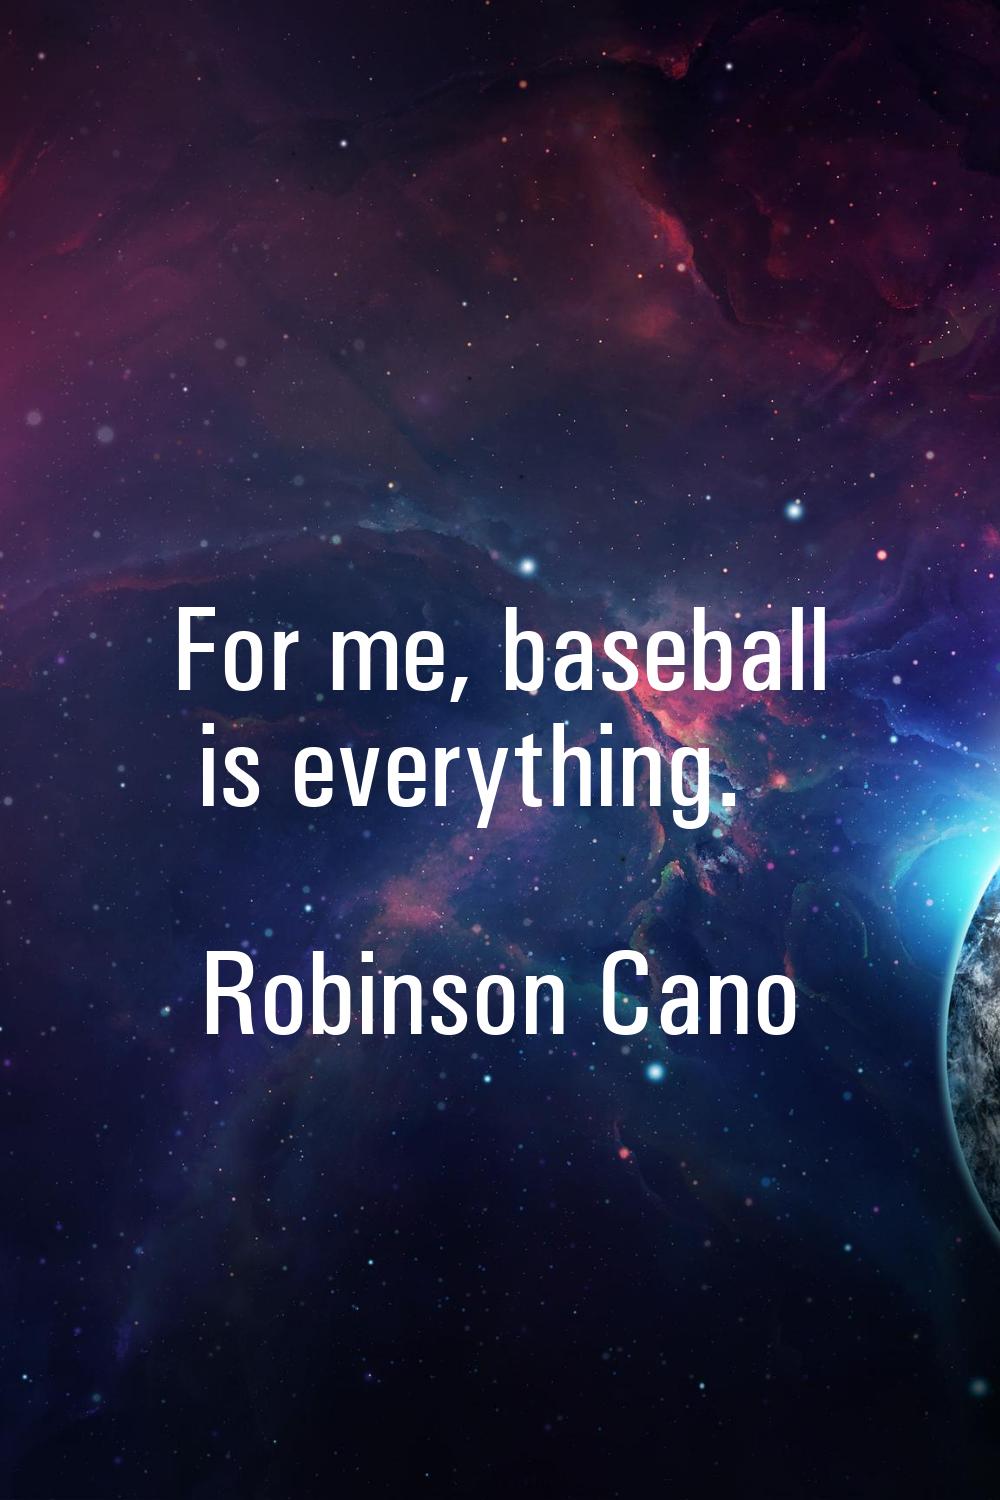 For me, baseball is everything.